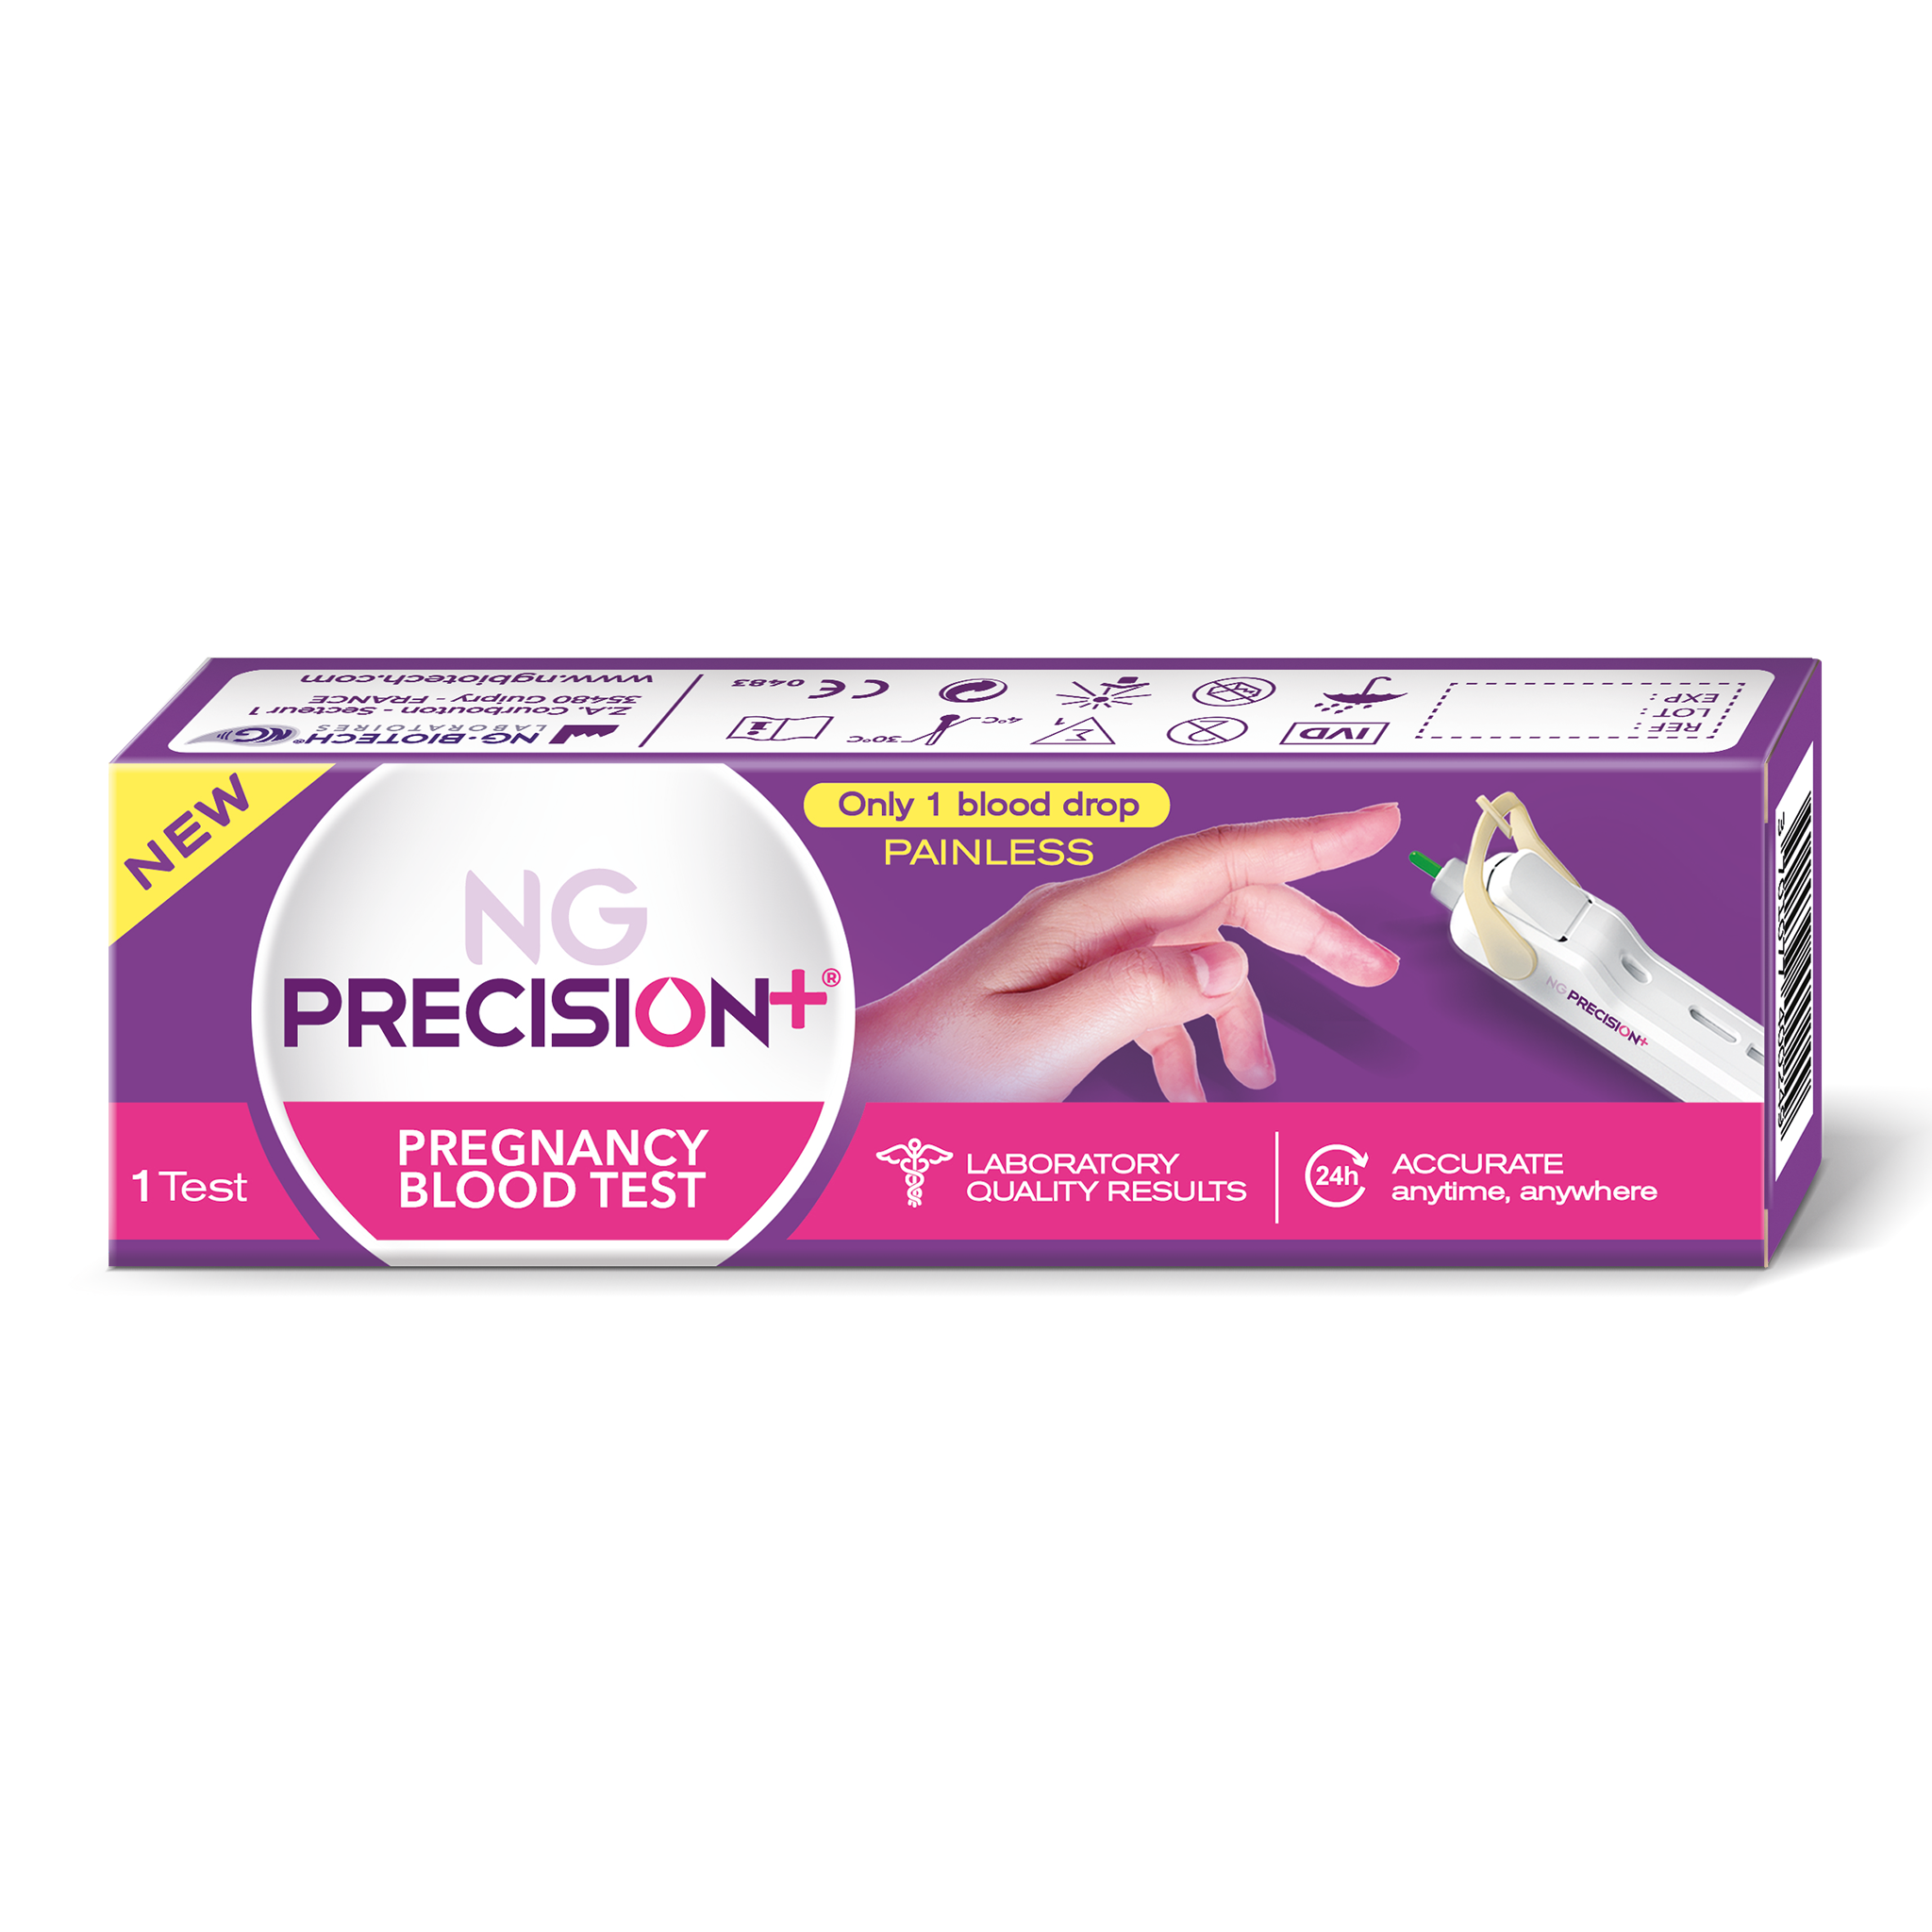 outer packaging of ng precision pregnancy test